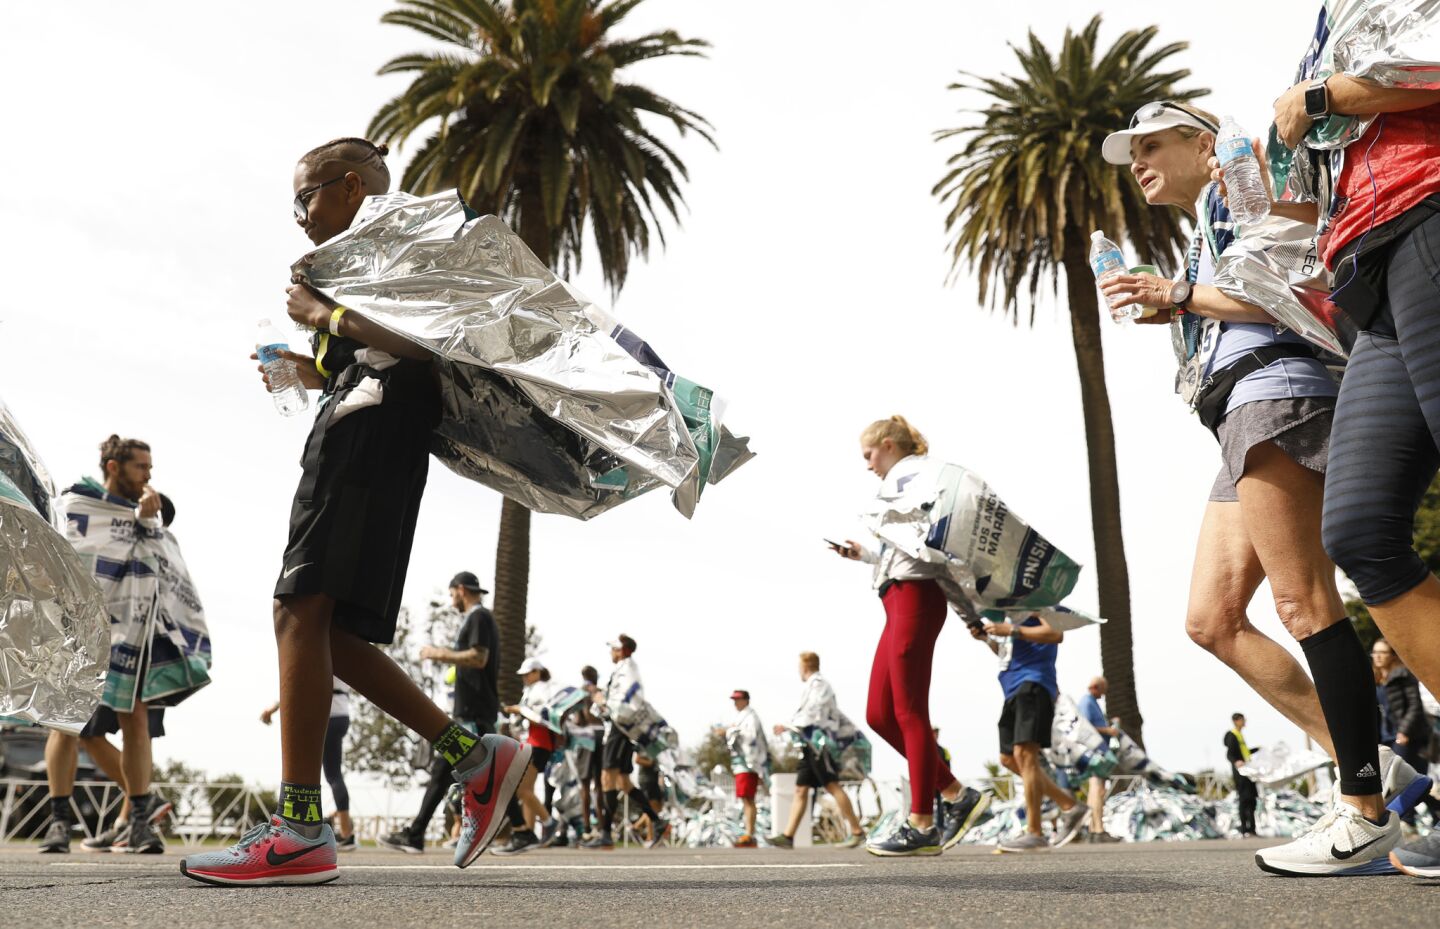 Runners warm up after finishing the L.A. Marathon in Santa Monica on Sunday.